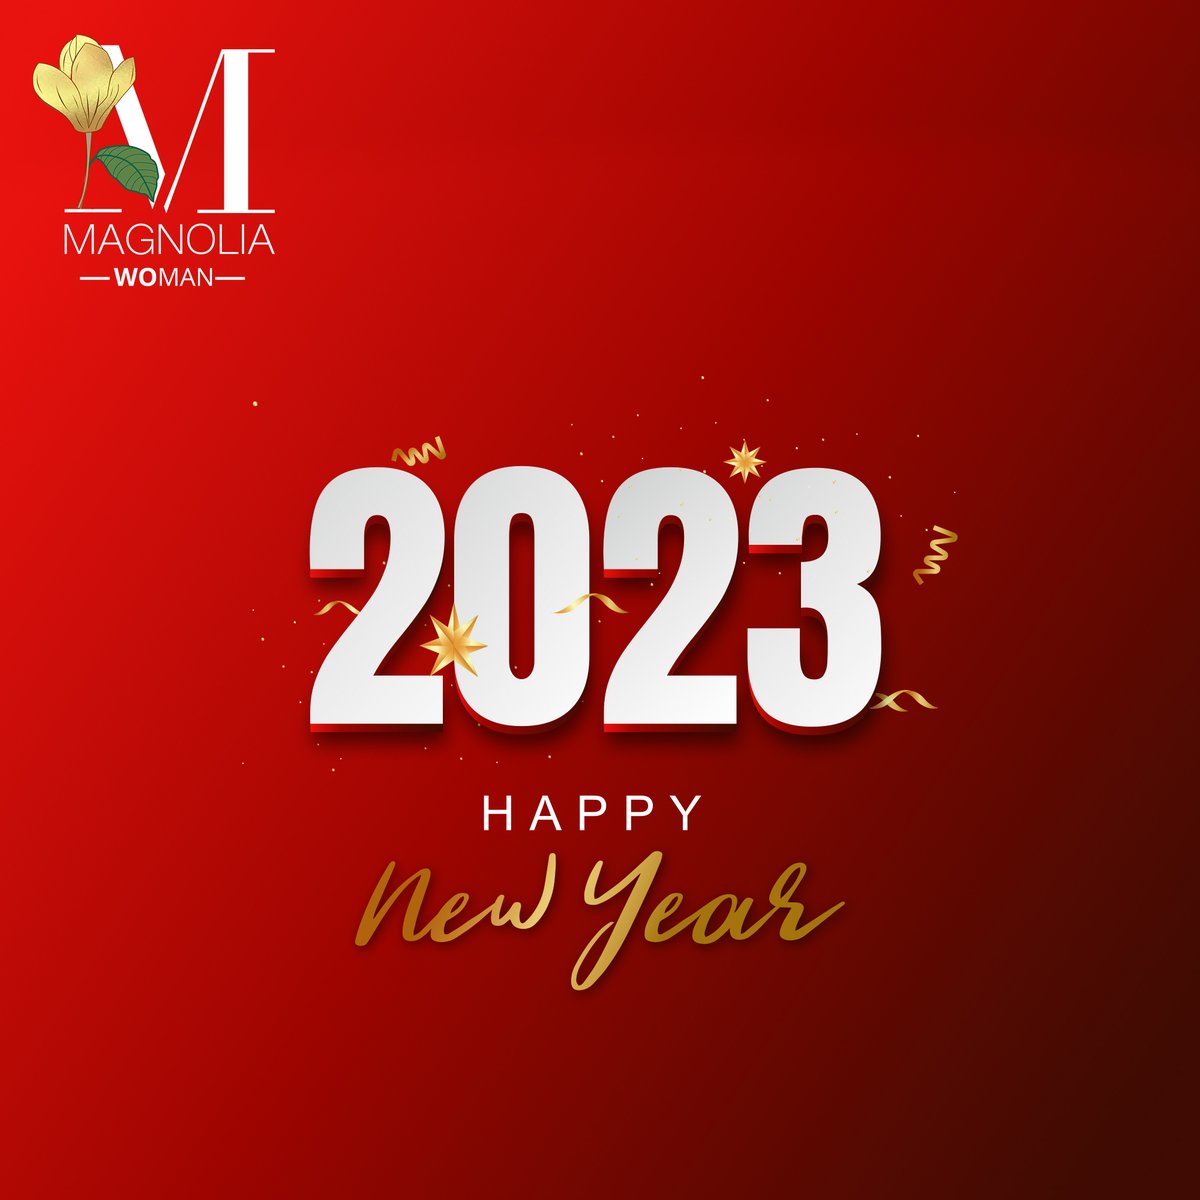 Wishing you a New Year full of style!
#themagnoliaindia #themagnolia #NewYear #HappyNewYear2023